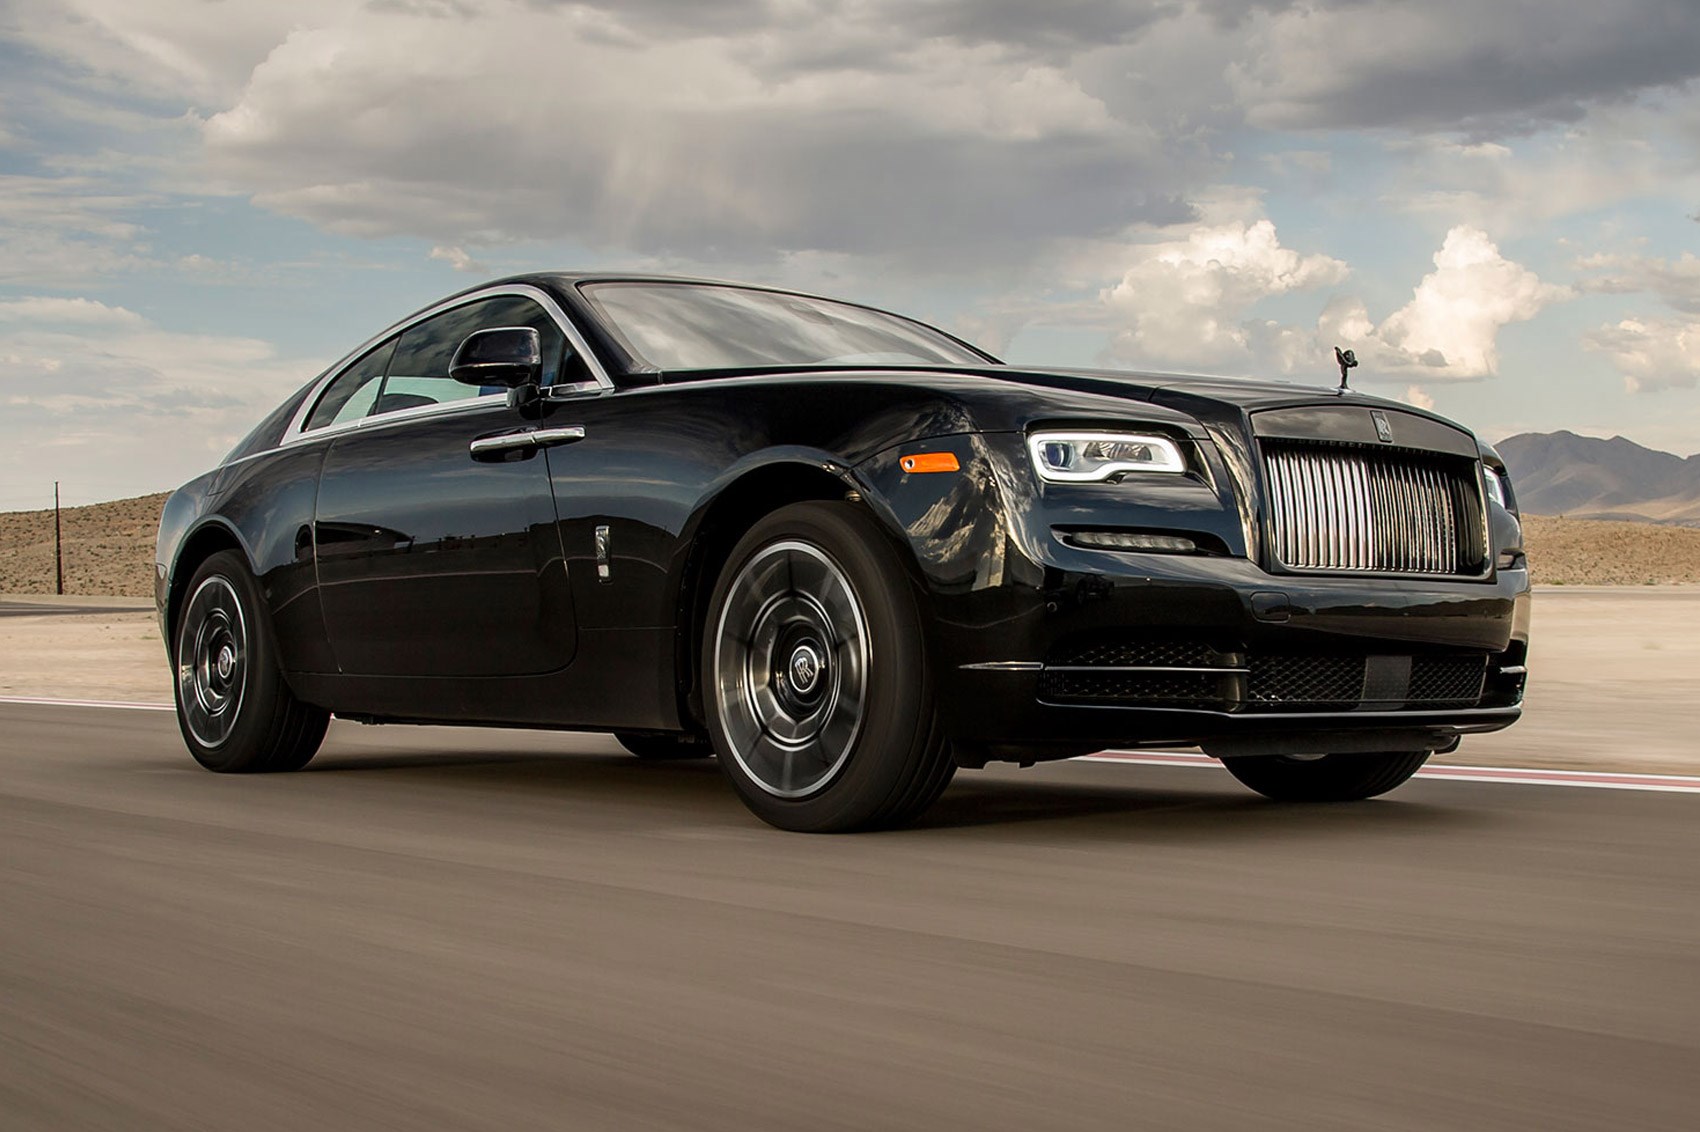 Motoring review RollsRoyce Wraith has a sporty swagger but does this  beast roar  The Independent  The Independent